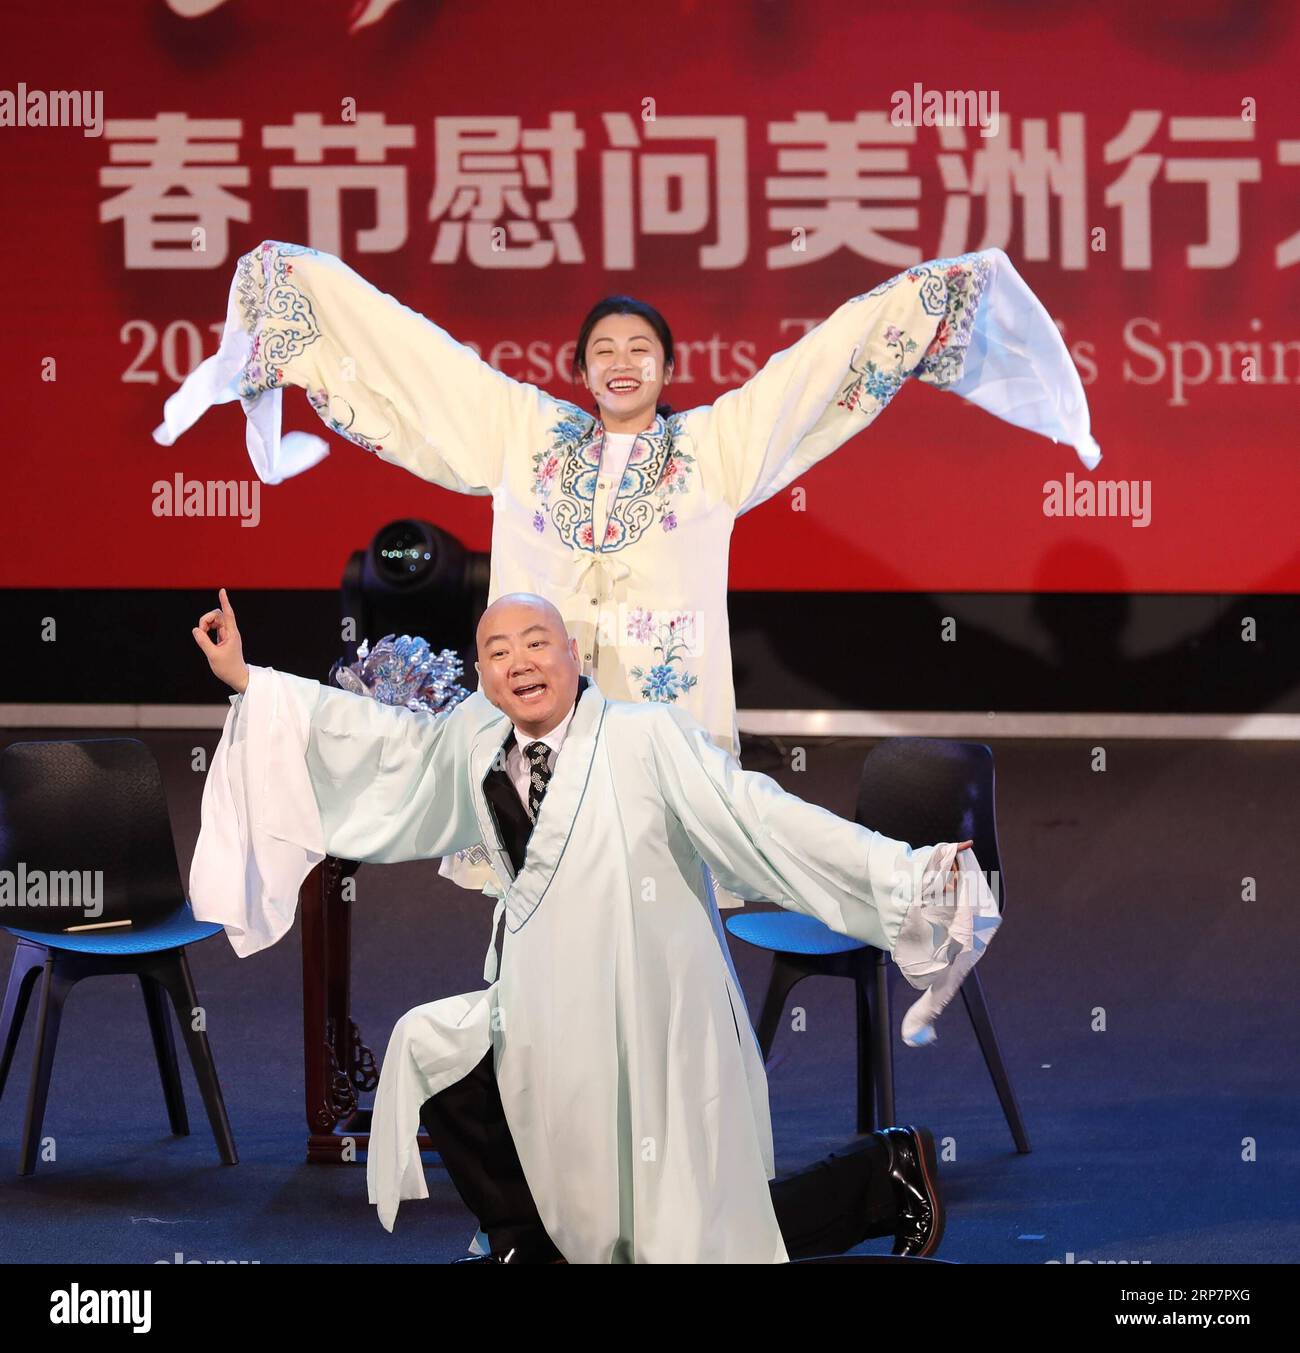 190210) -- SAN FRANCISCO, Feb. 10, 2019 (Xinhua) -- Crosstalk actor Guo  Donglin (down) performs with partner during a Spring Festival tour by  Chinese arts troupes in San Francisco Bay Area, the